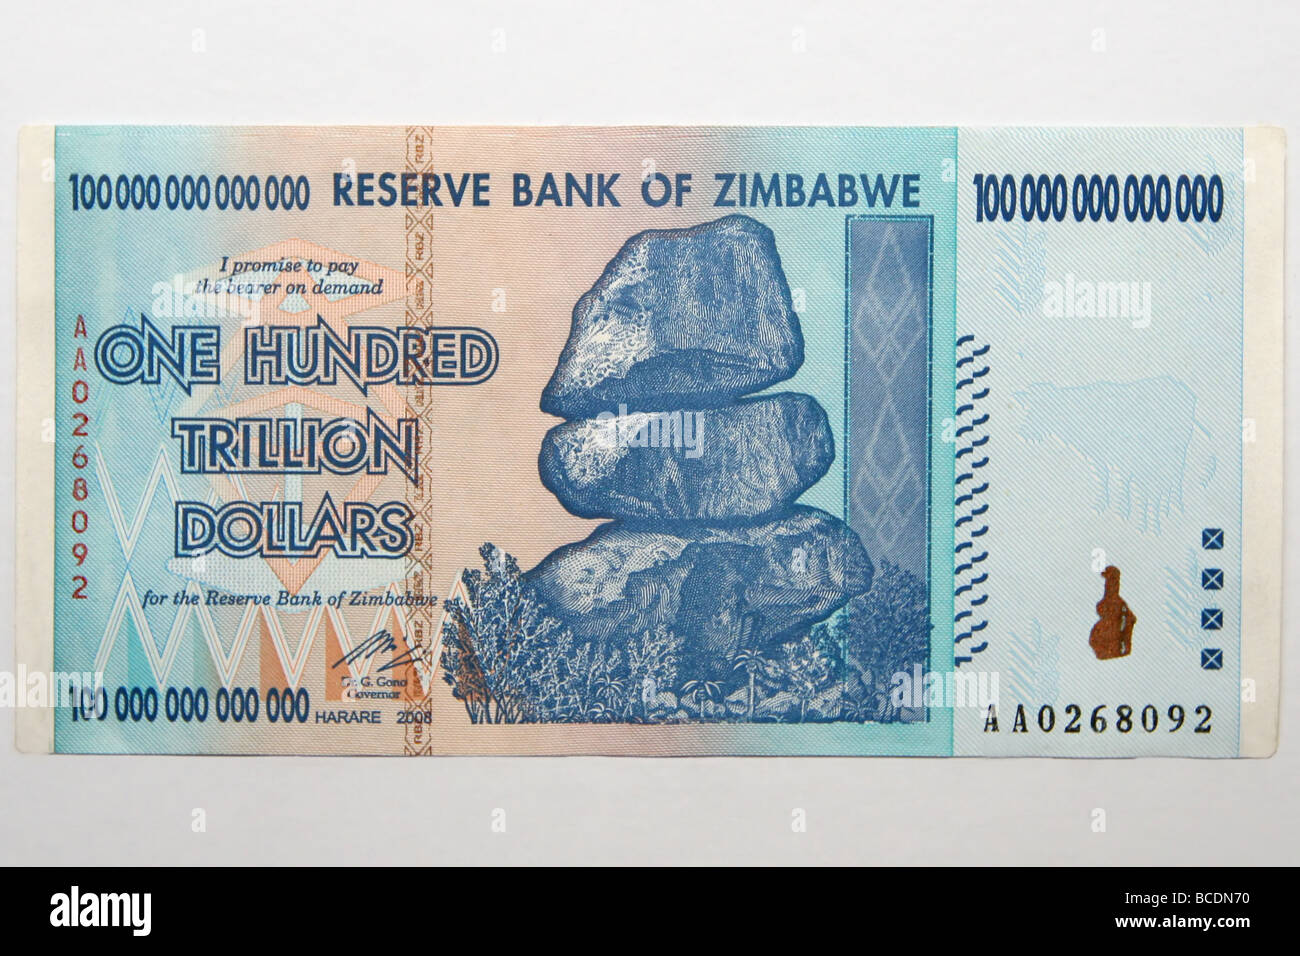 bank note of one hundred trillion dollars, from zimbabwe. Bank note with the highest nominal value in history Stock Photo